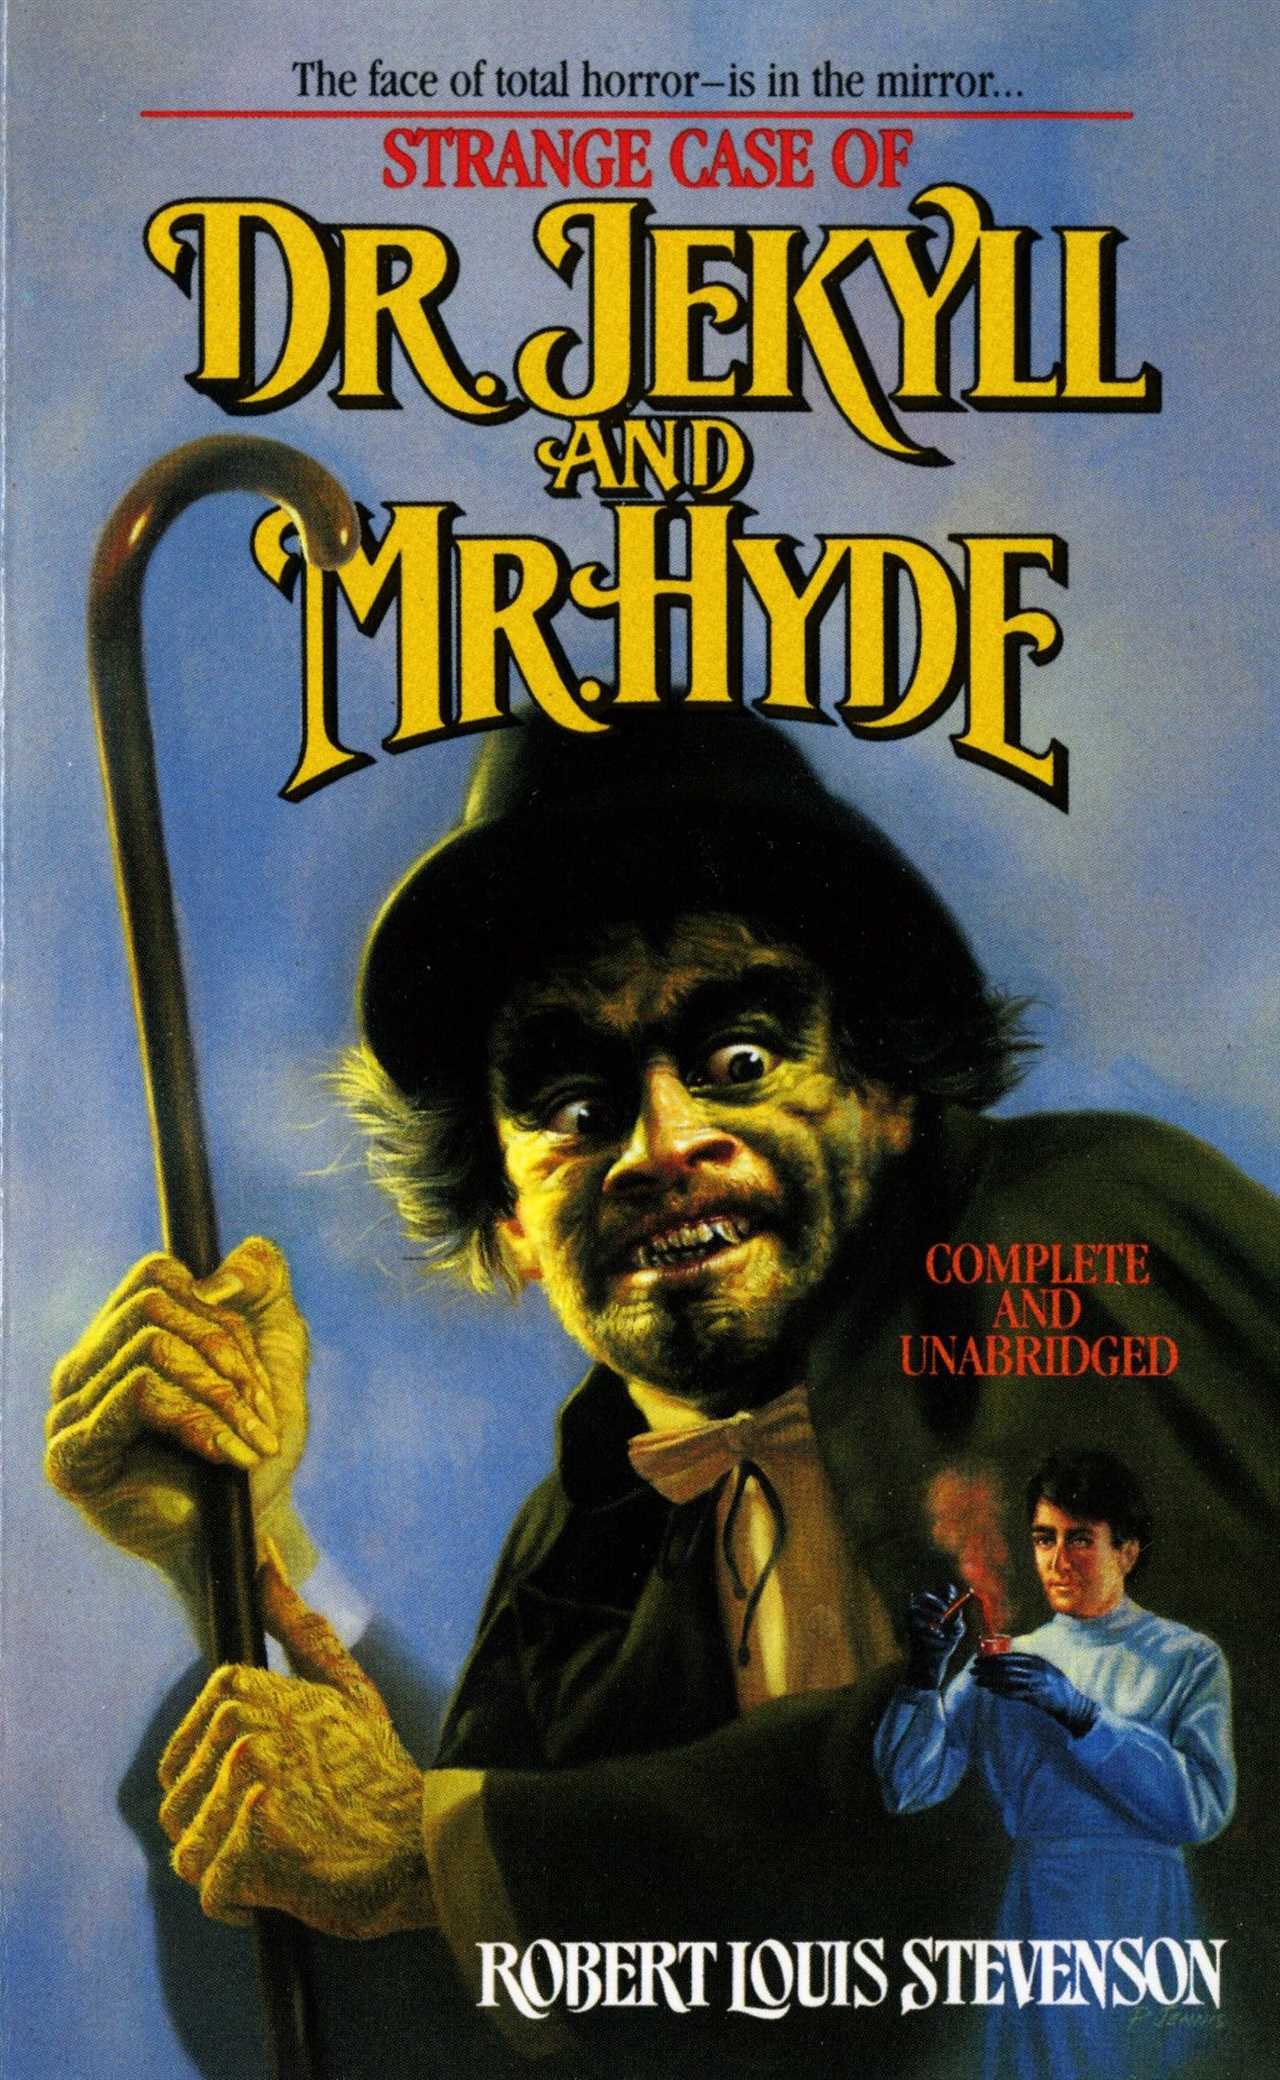 The Sinister Transformation of Mr. Hyde